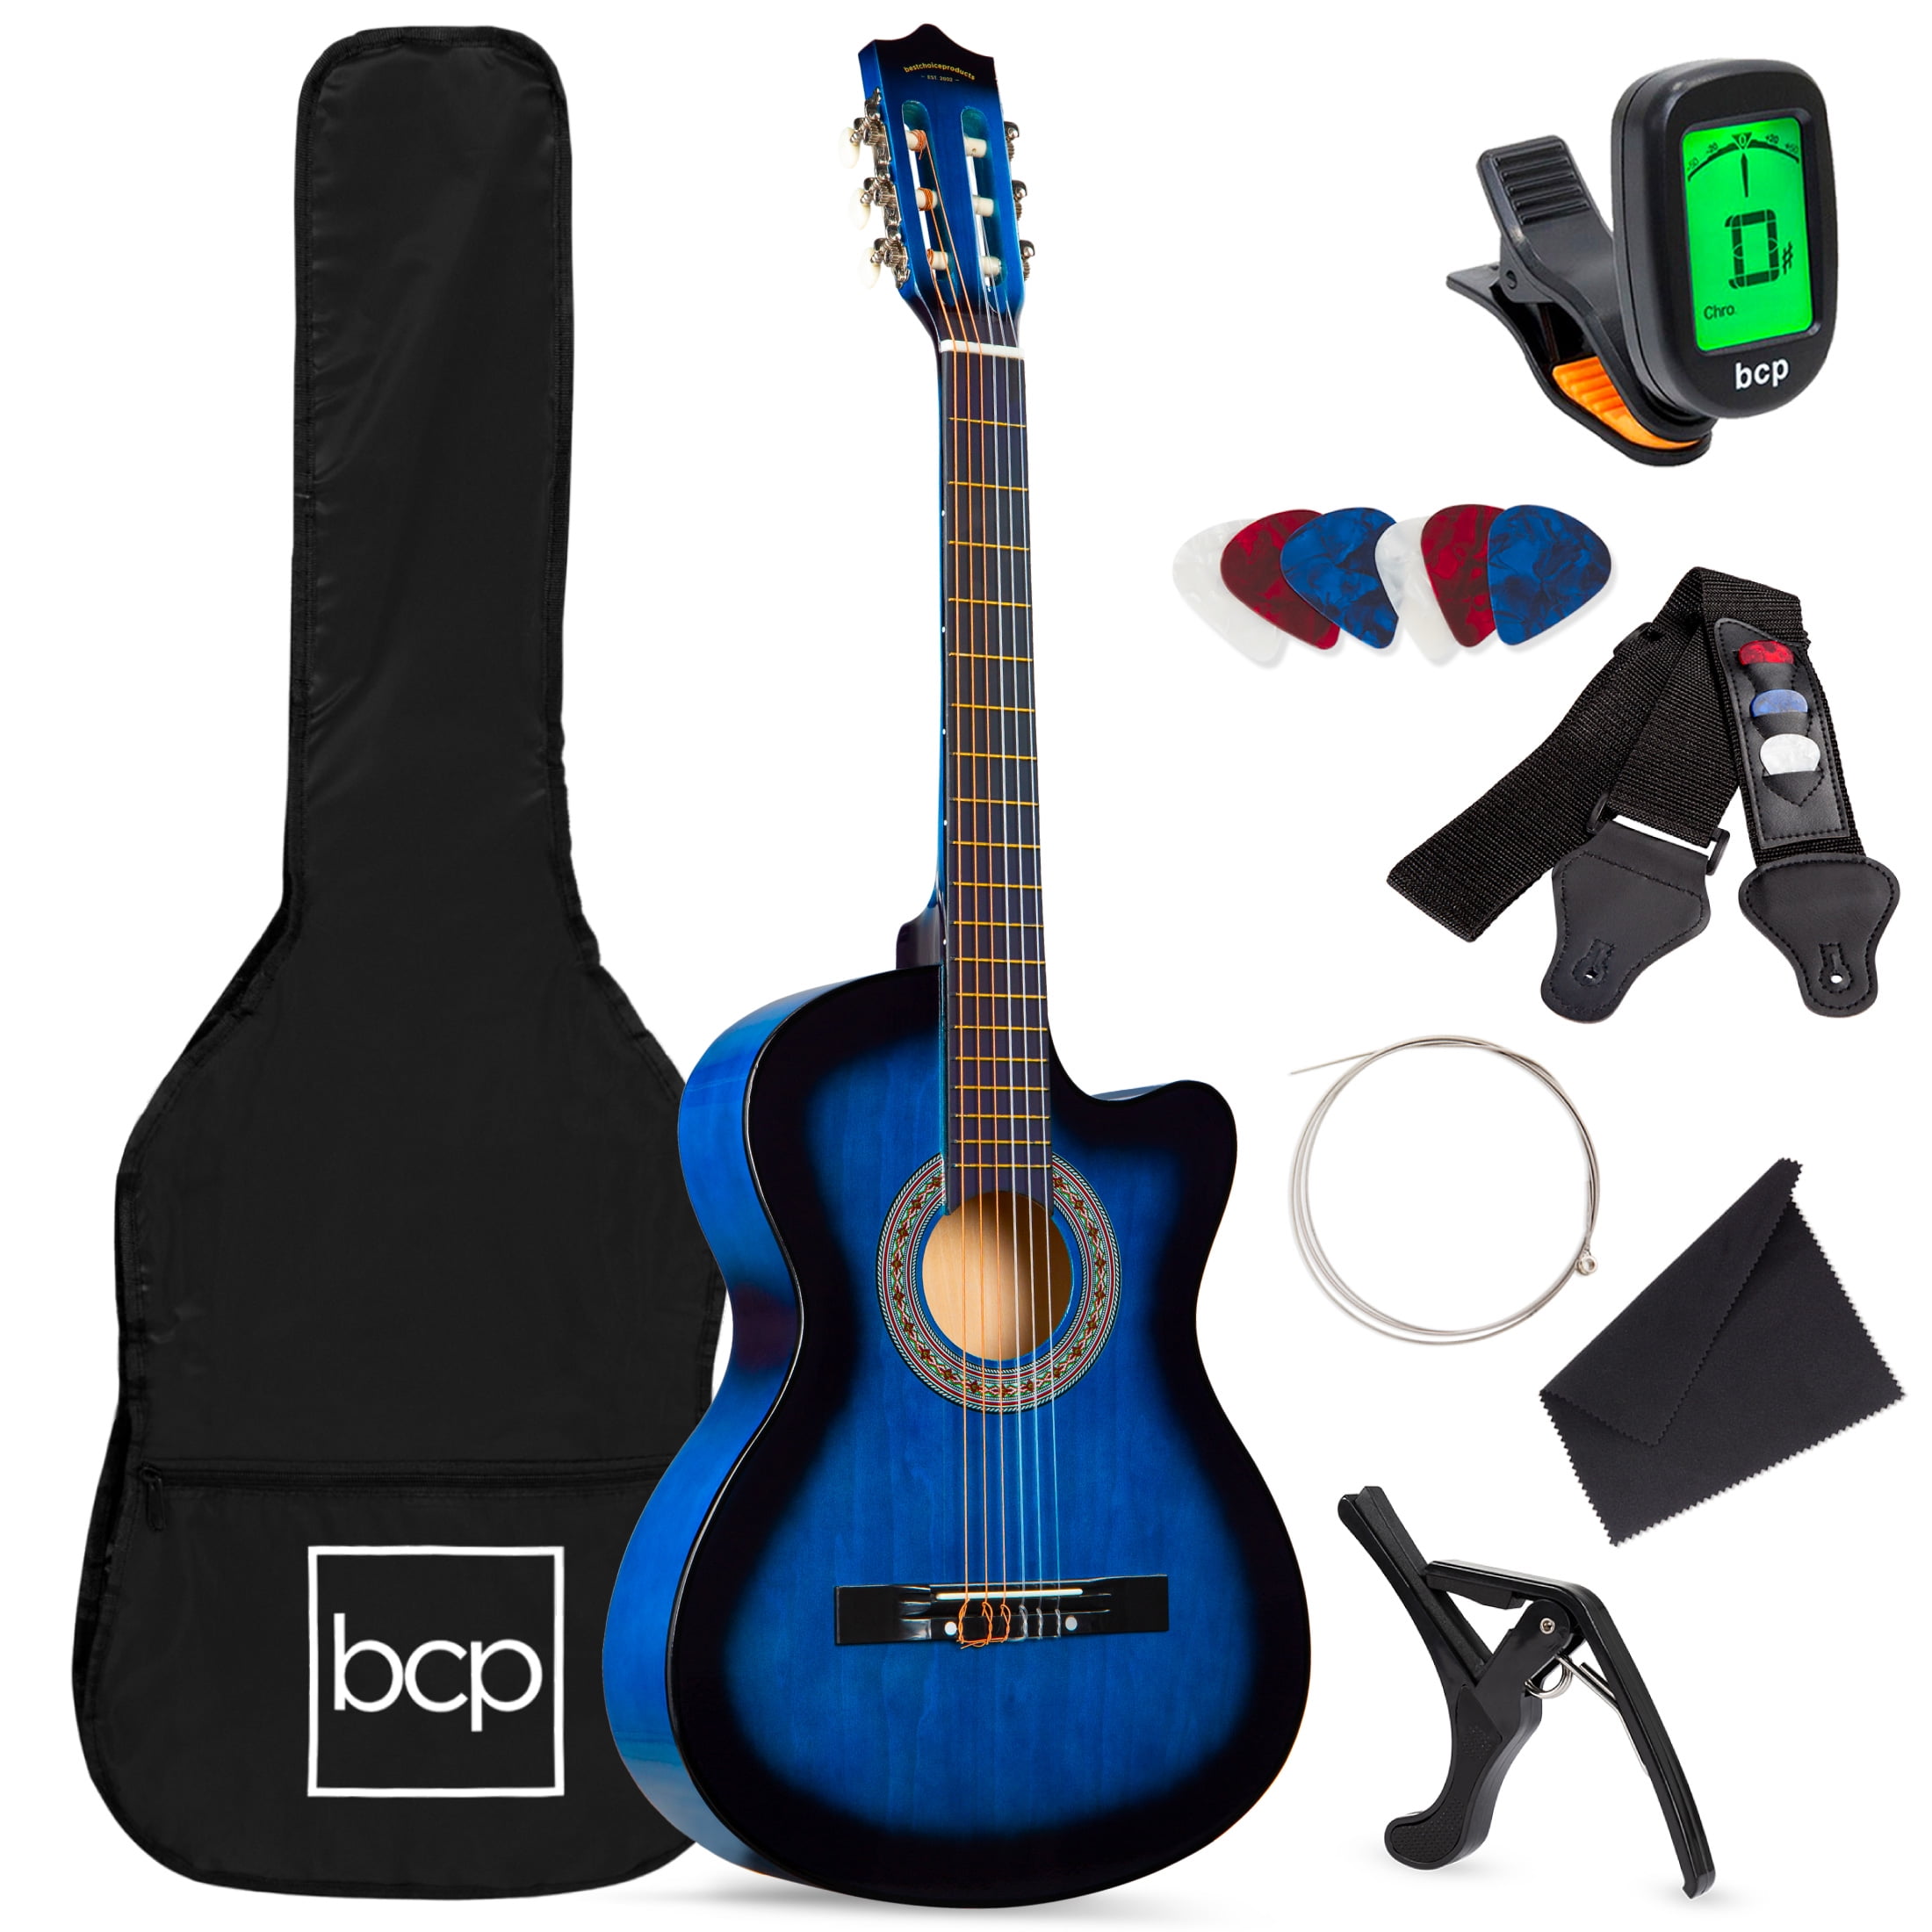 Best Choice Products Beginner Acoustic Guitar Starter Set 38in w/ Case, All Wood Cutaway Design, Strap, Tuner - Blue